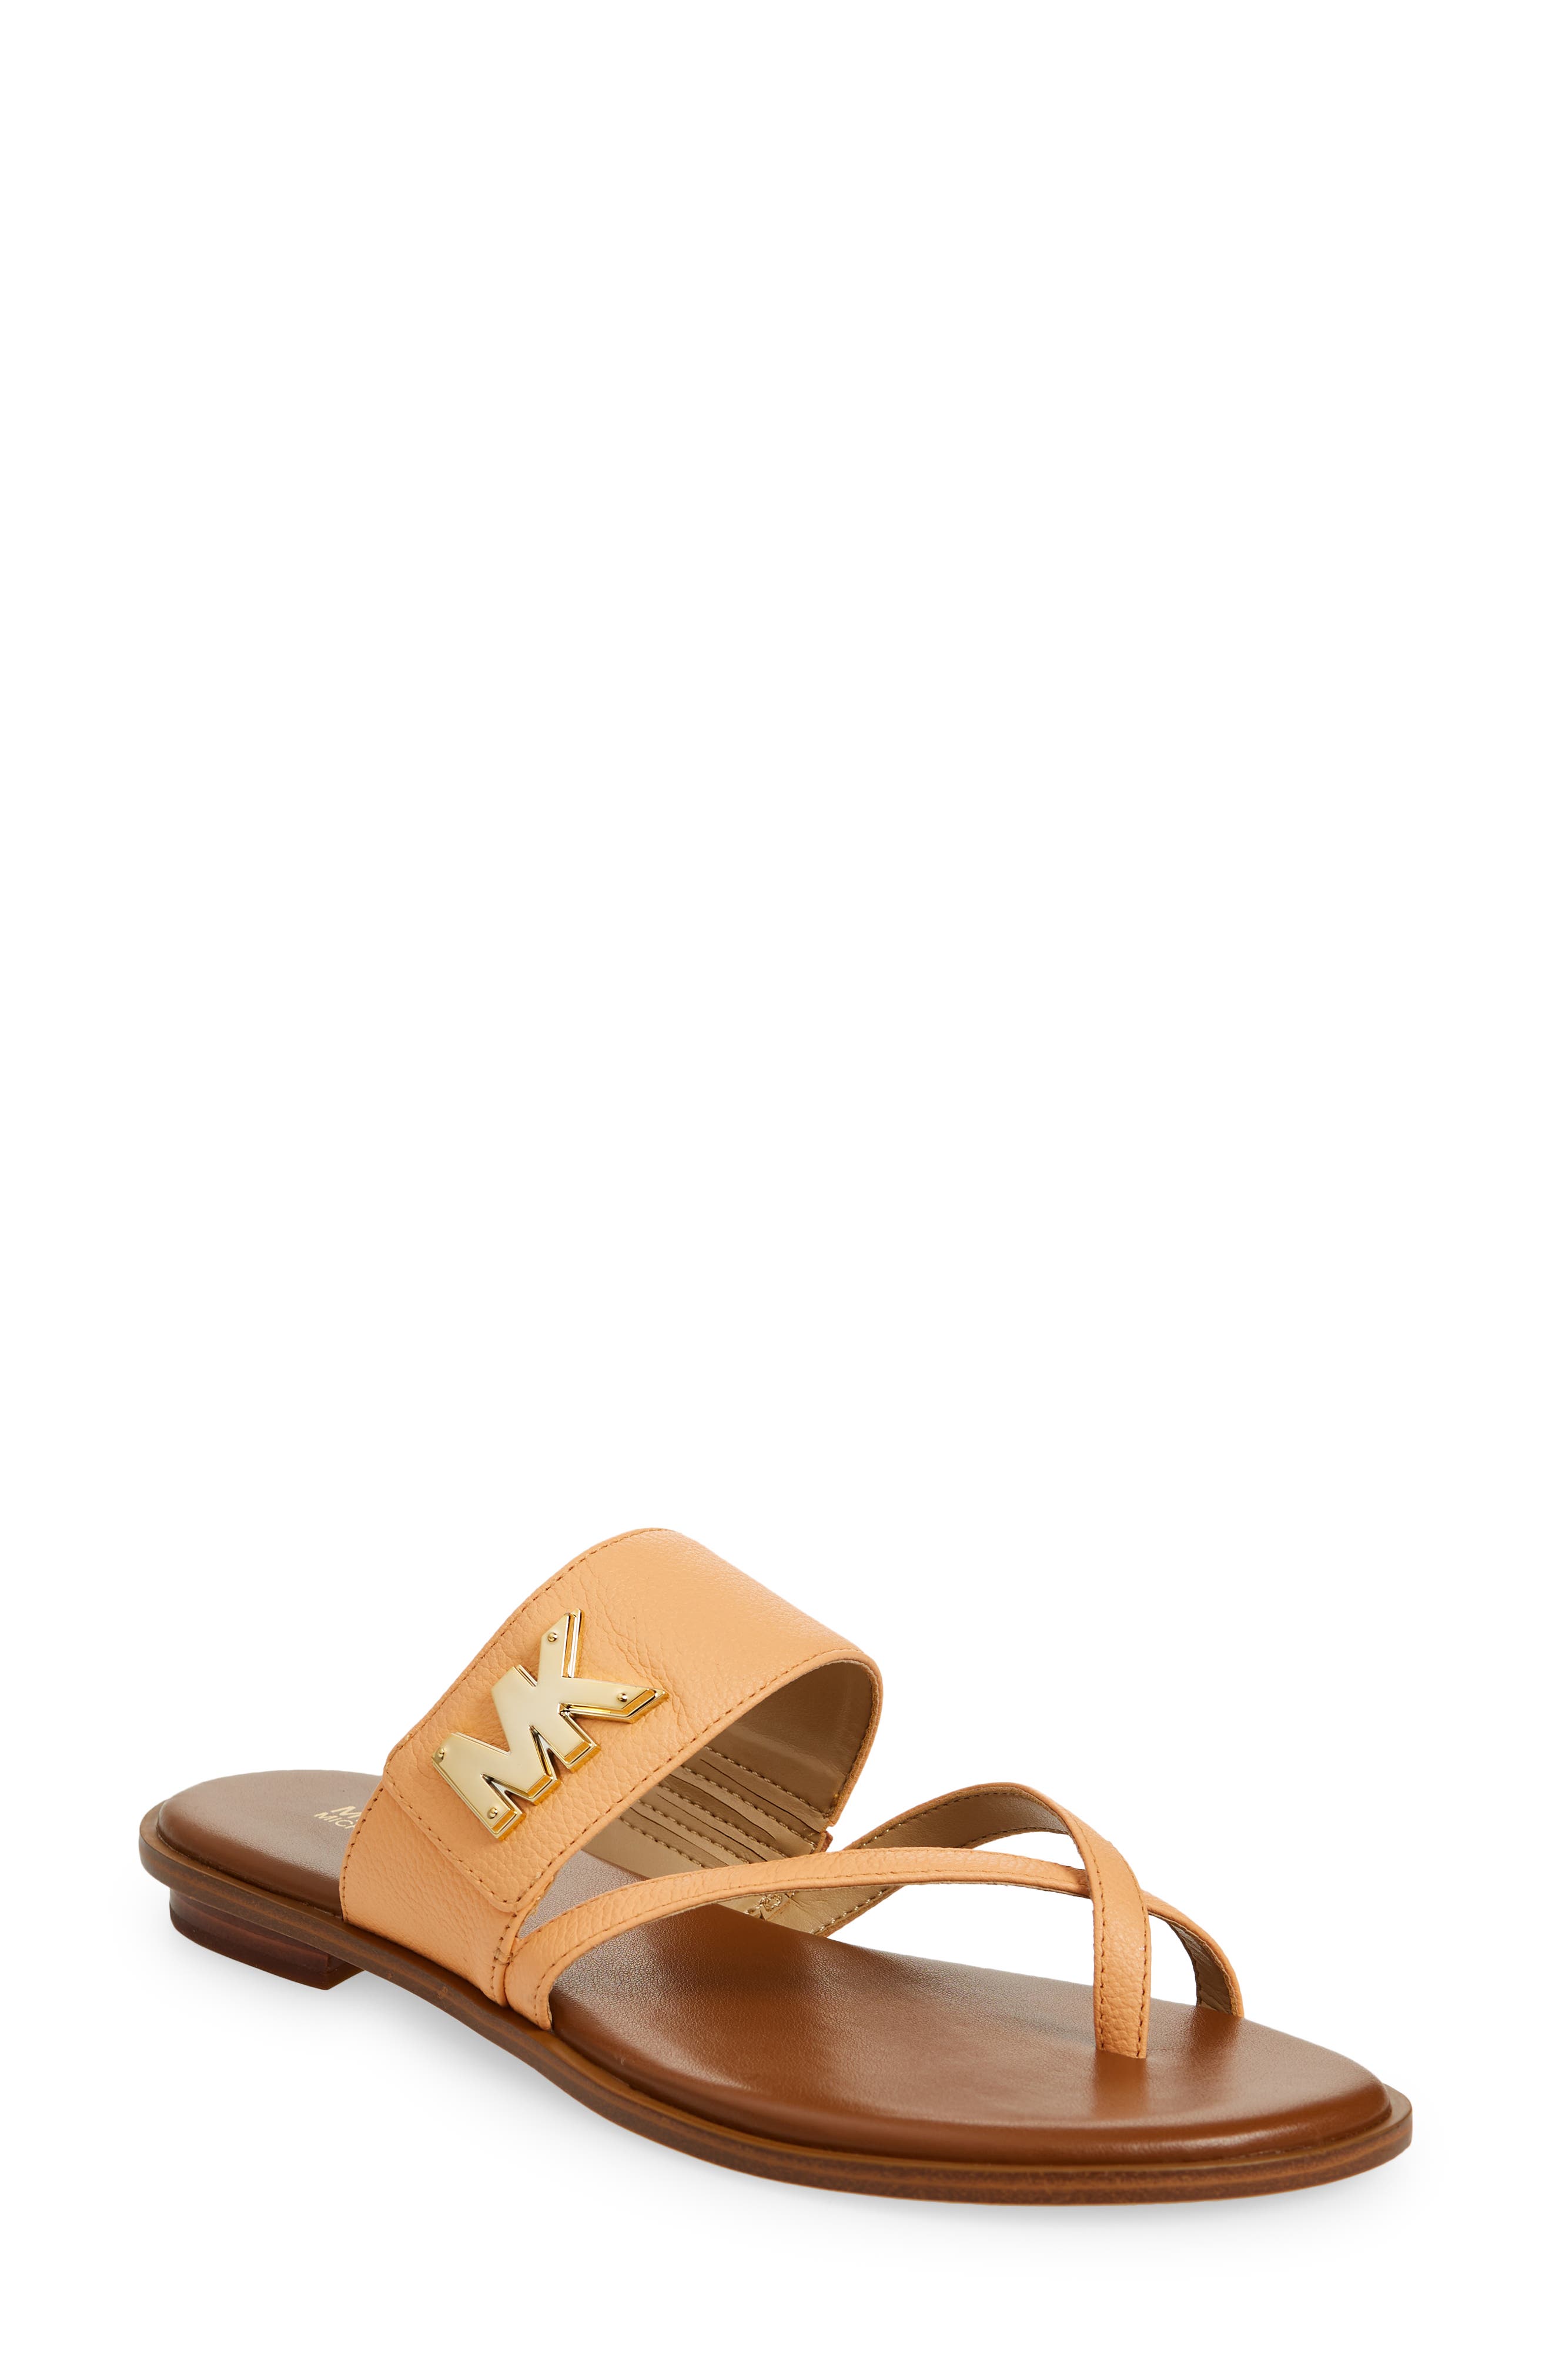 UPC 195512220388 product image for MICHAEL Michael Kors Sidney Toe Loop Sandal, Size 8 in Cantaloupe at Nordstrom | upcitemdb.com